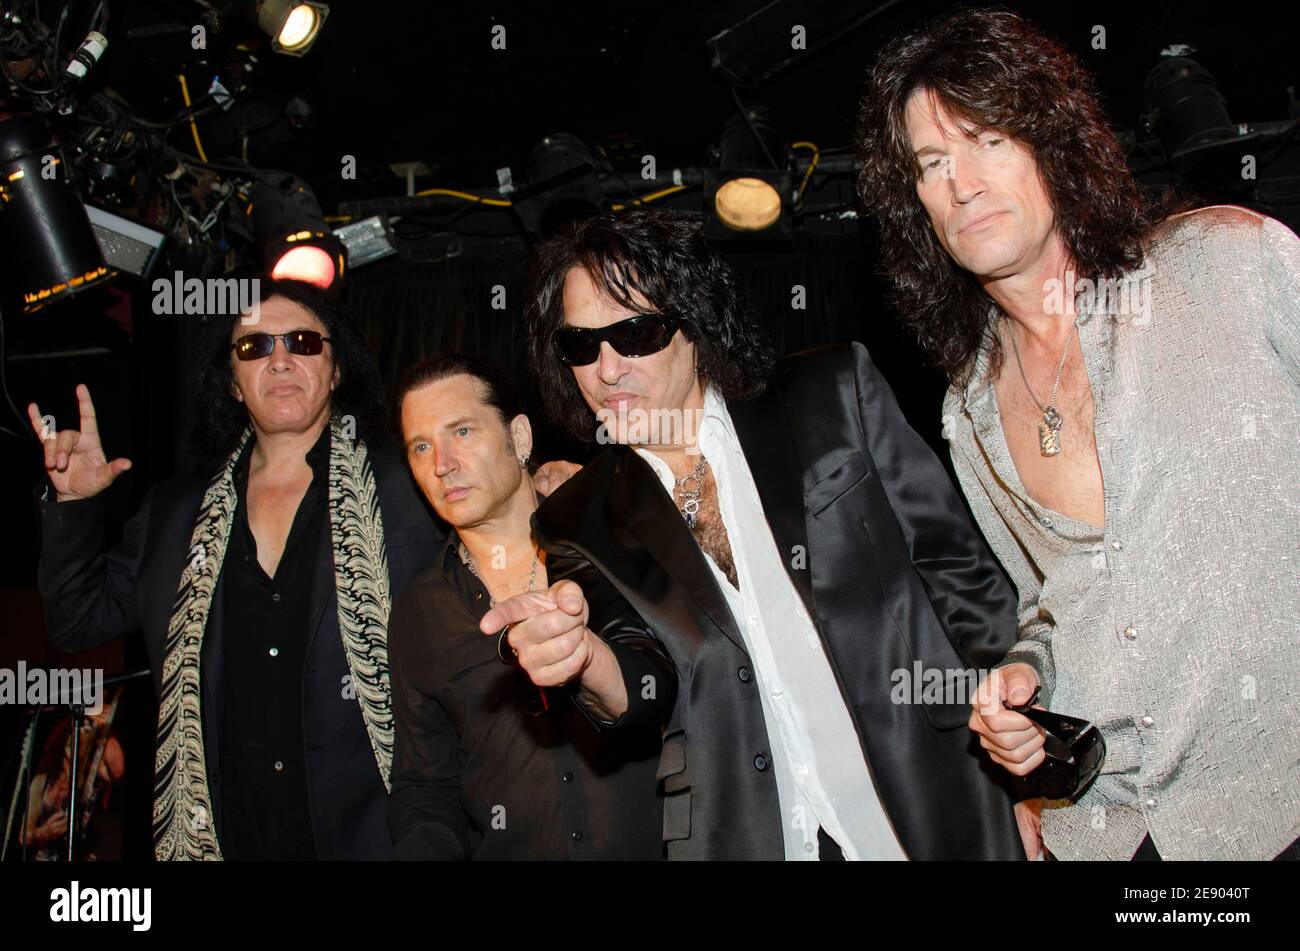 August 21, 2012: (L-R) Gene Simmons, Eric Singer, Paul Stanley and Tommy  Thayer of the Rock Band KISS attend the launch of the KISS Monster Book.  (Credit Image: © Billy Bennight/ZUMA Wire